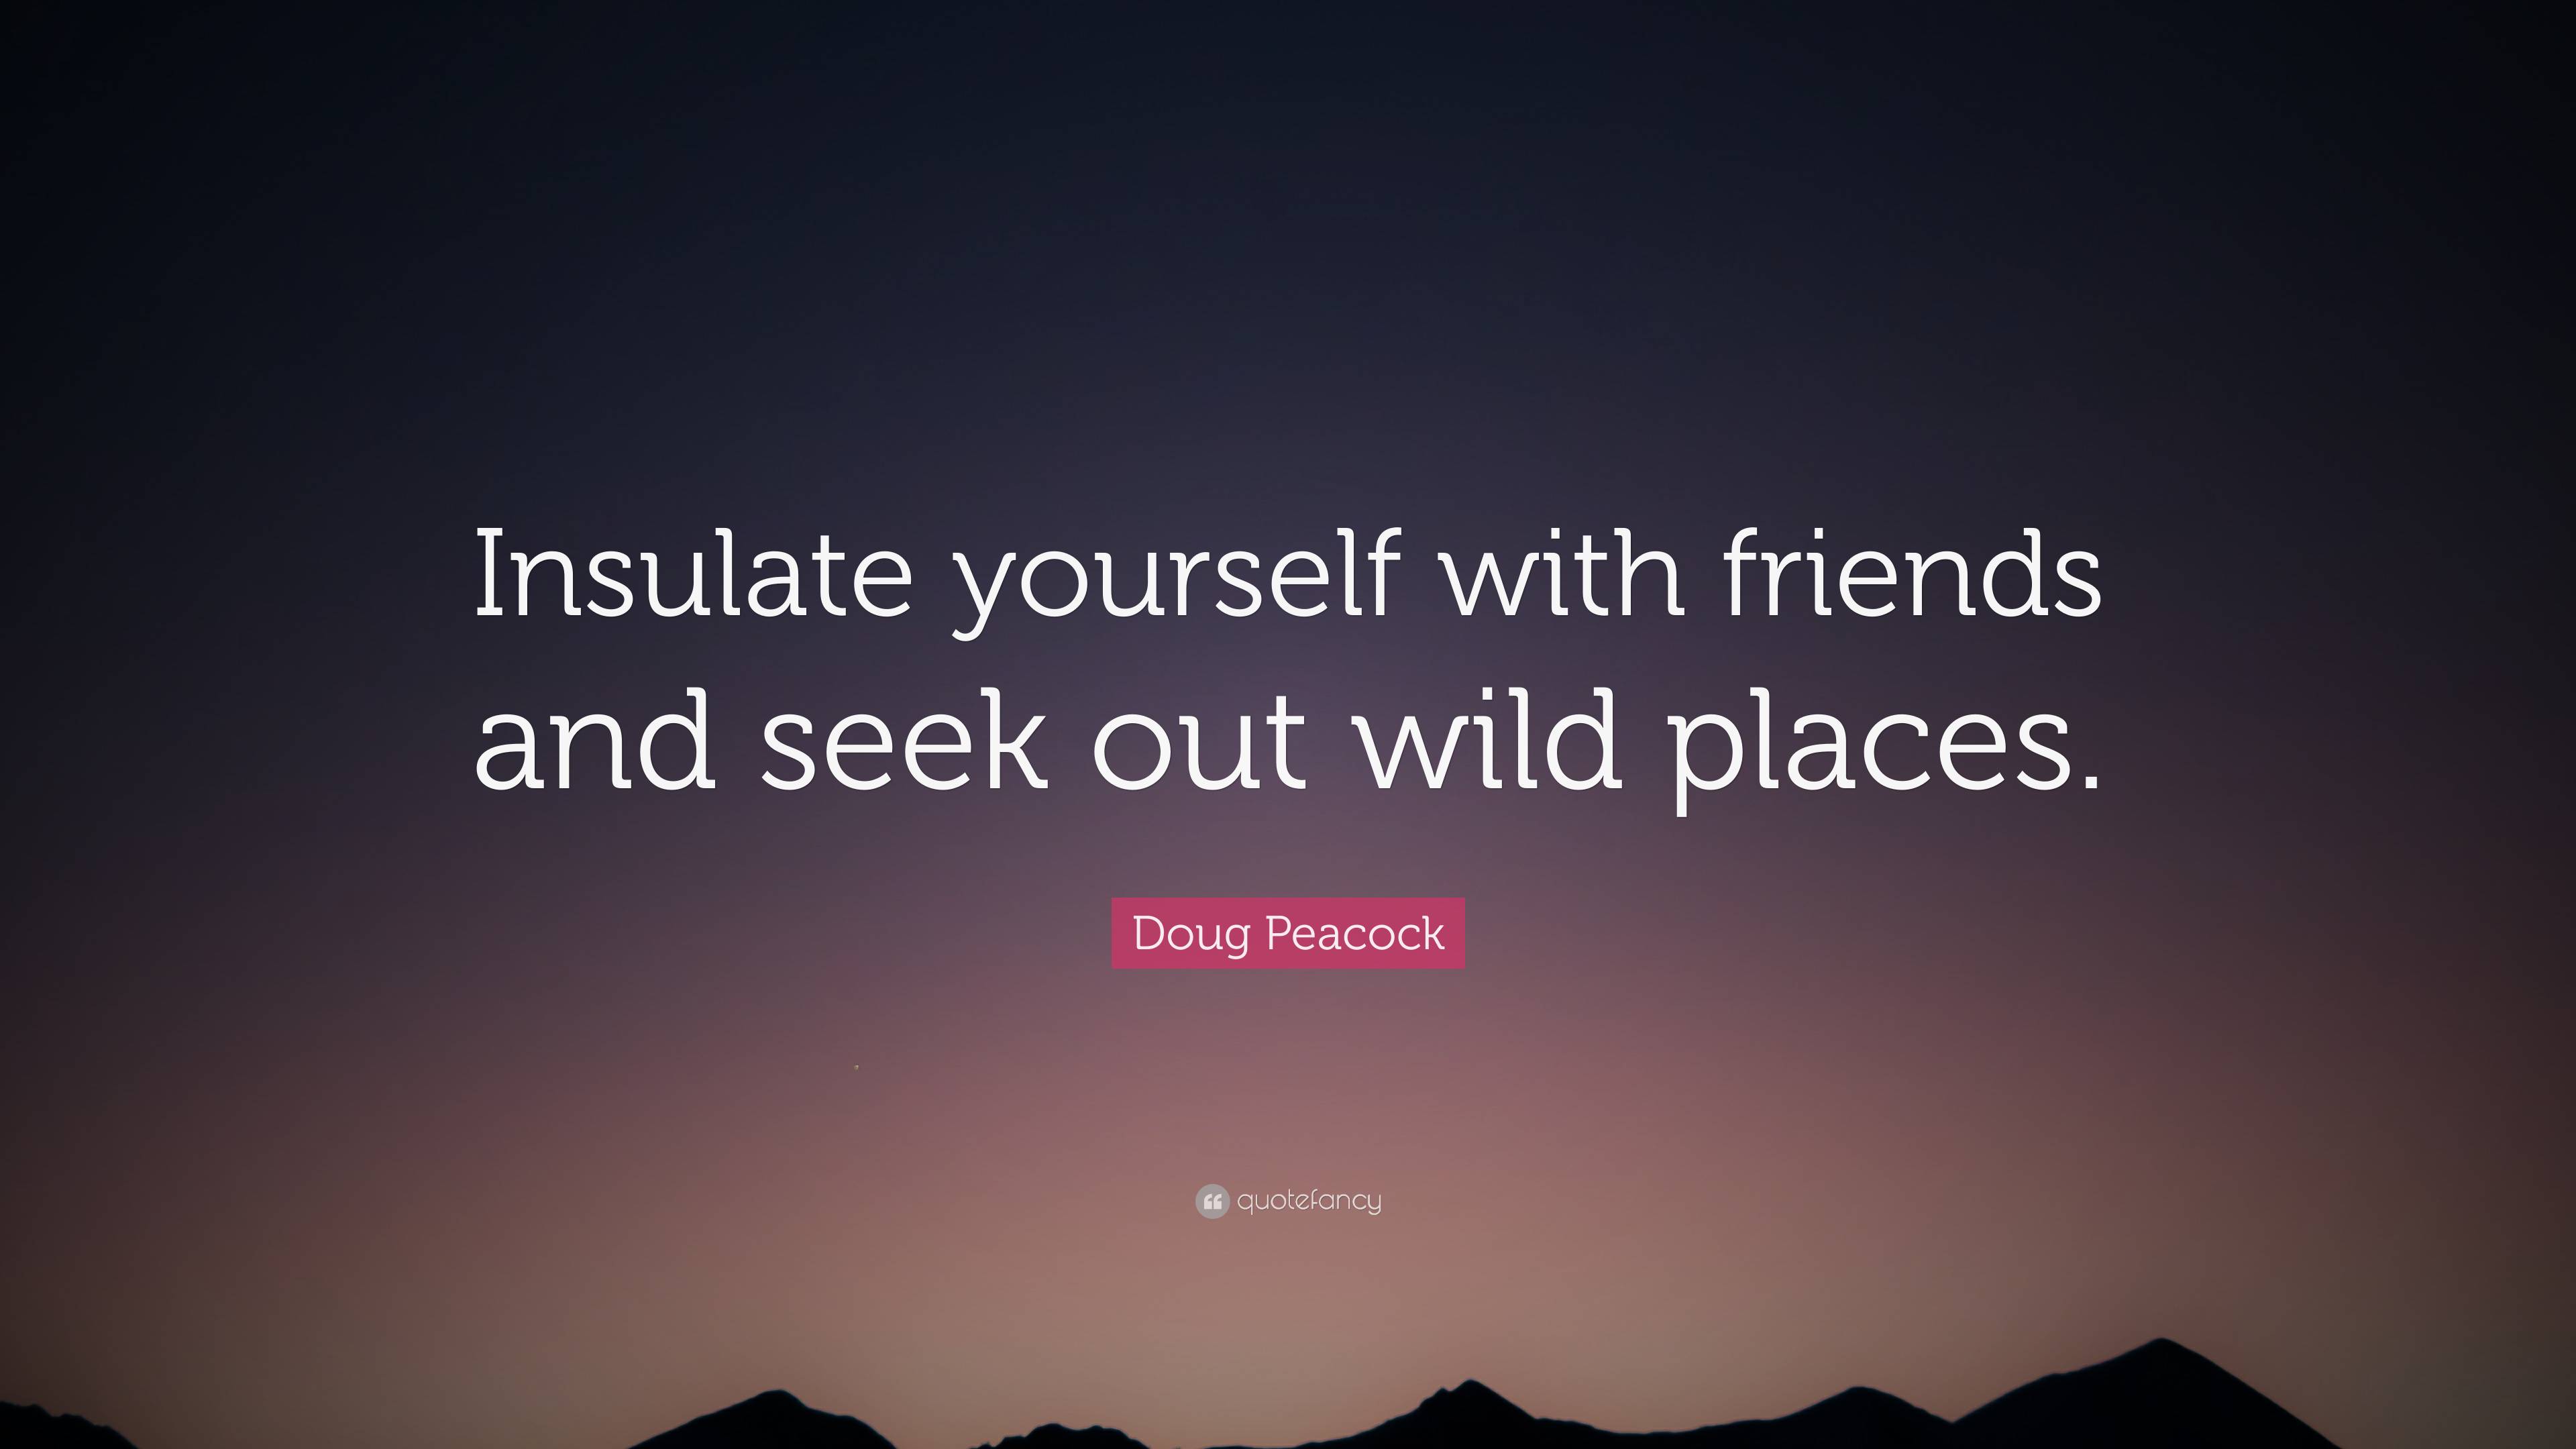 https://quotefancy.com/media/wallpaper/3840x2160/7122991-Doug-Peacock-Quote-Insulate-yourself-with-friends-and-seek-out.jpg